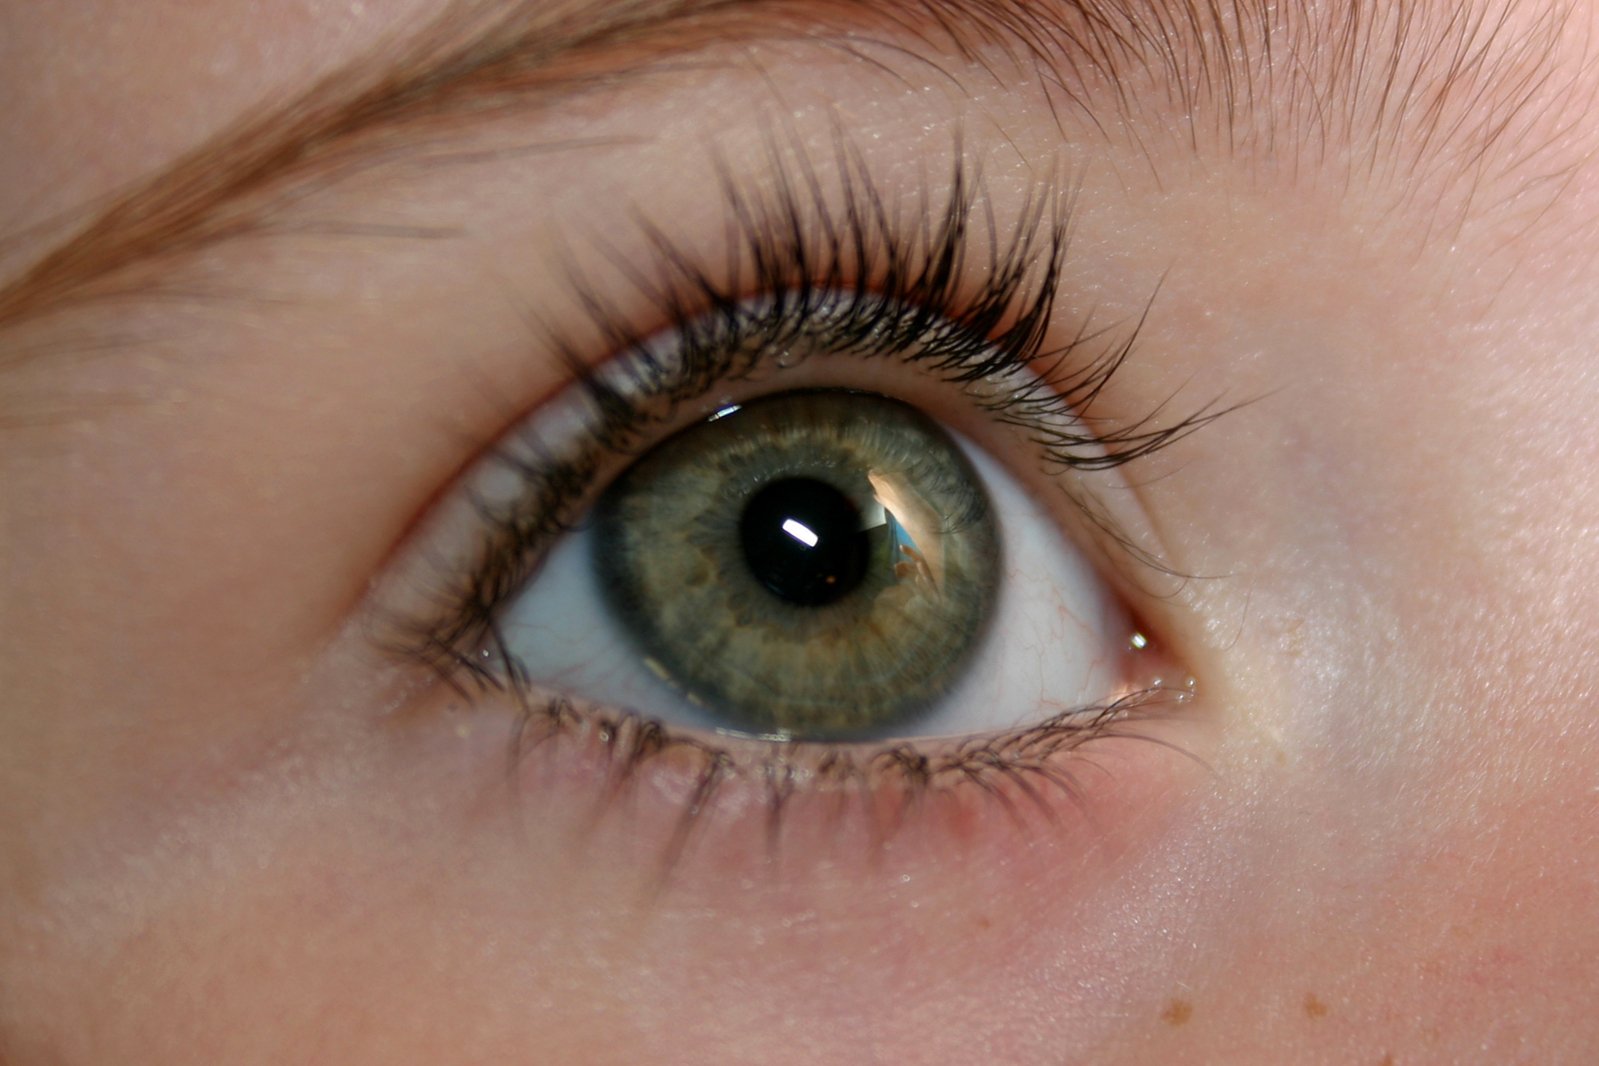 an close up view of a green eye with some light on it